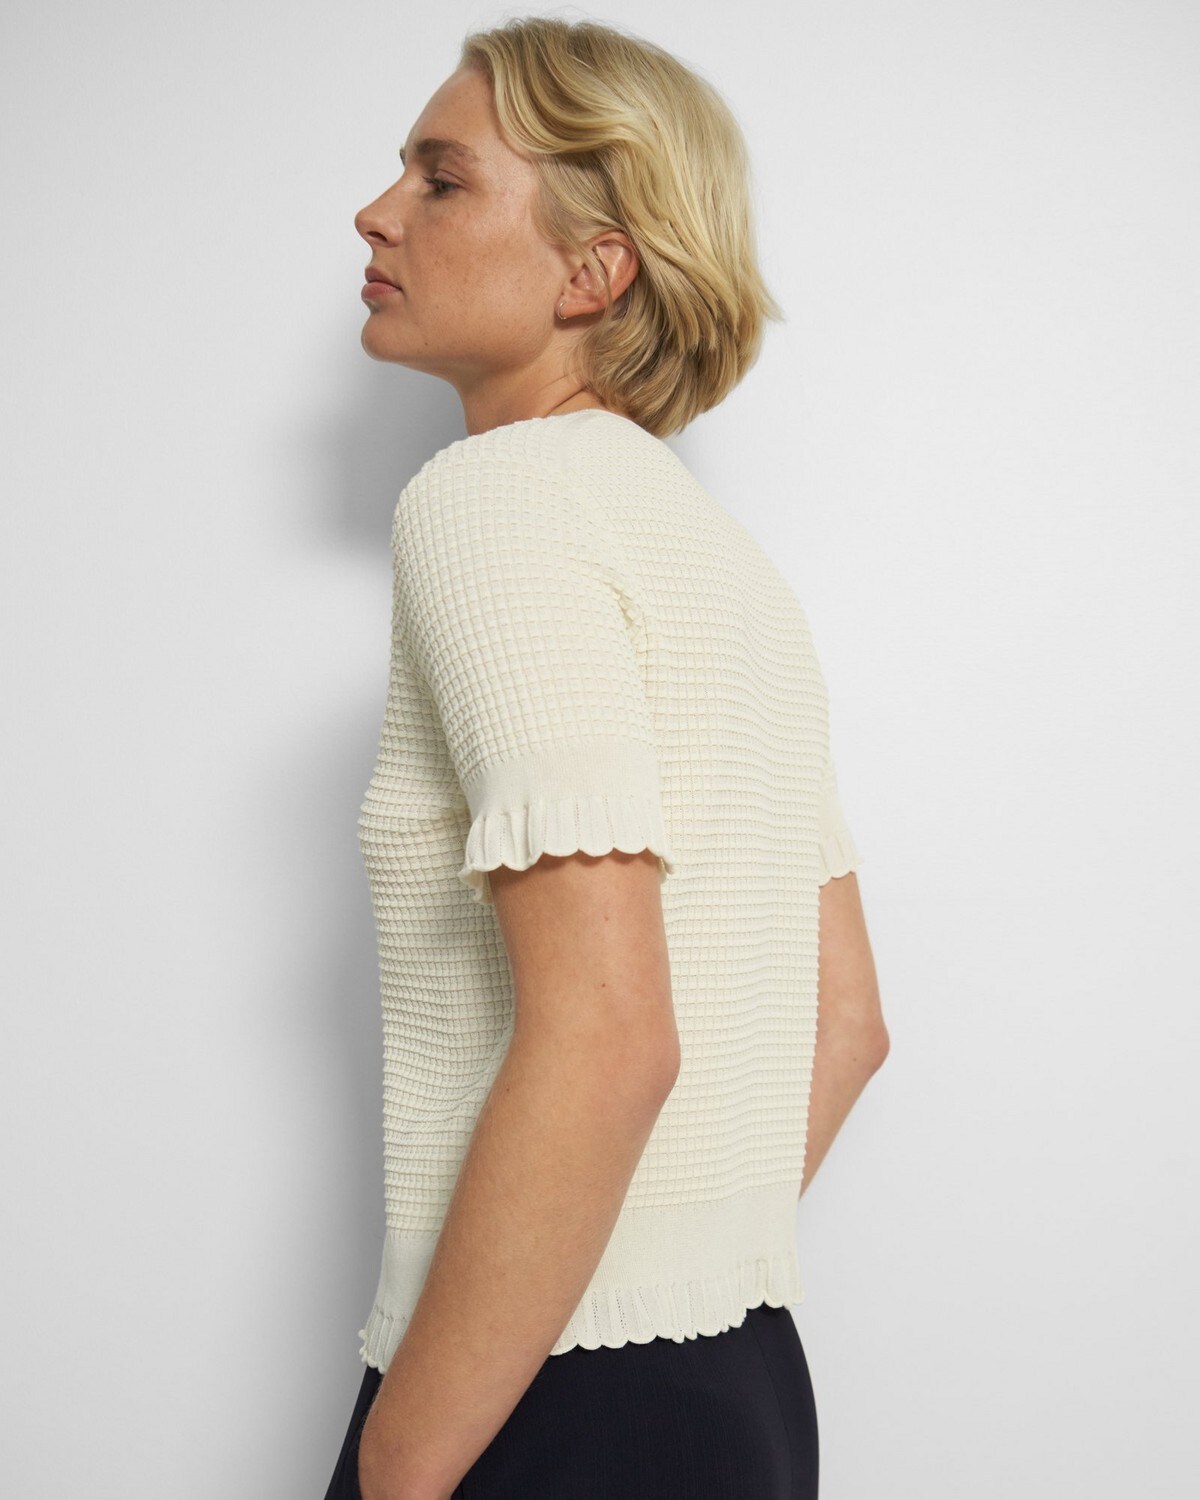 Short-Sleeve Sweater in Cotton Blend